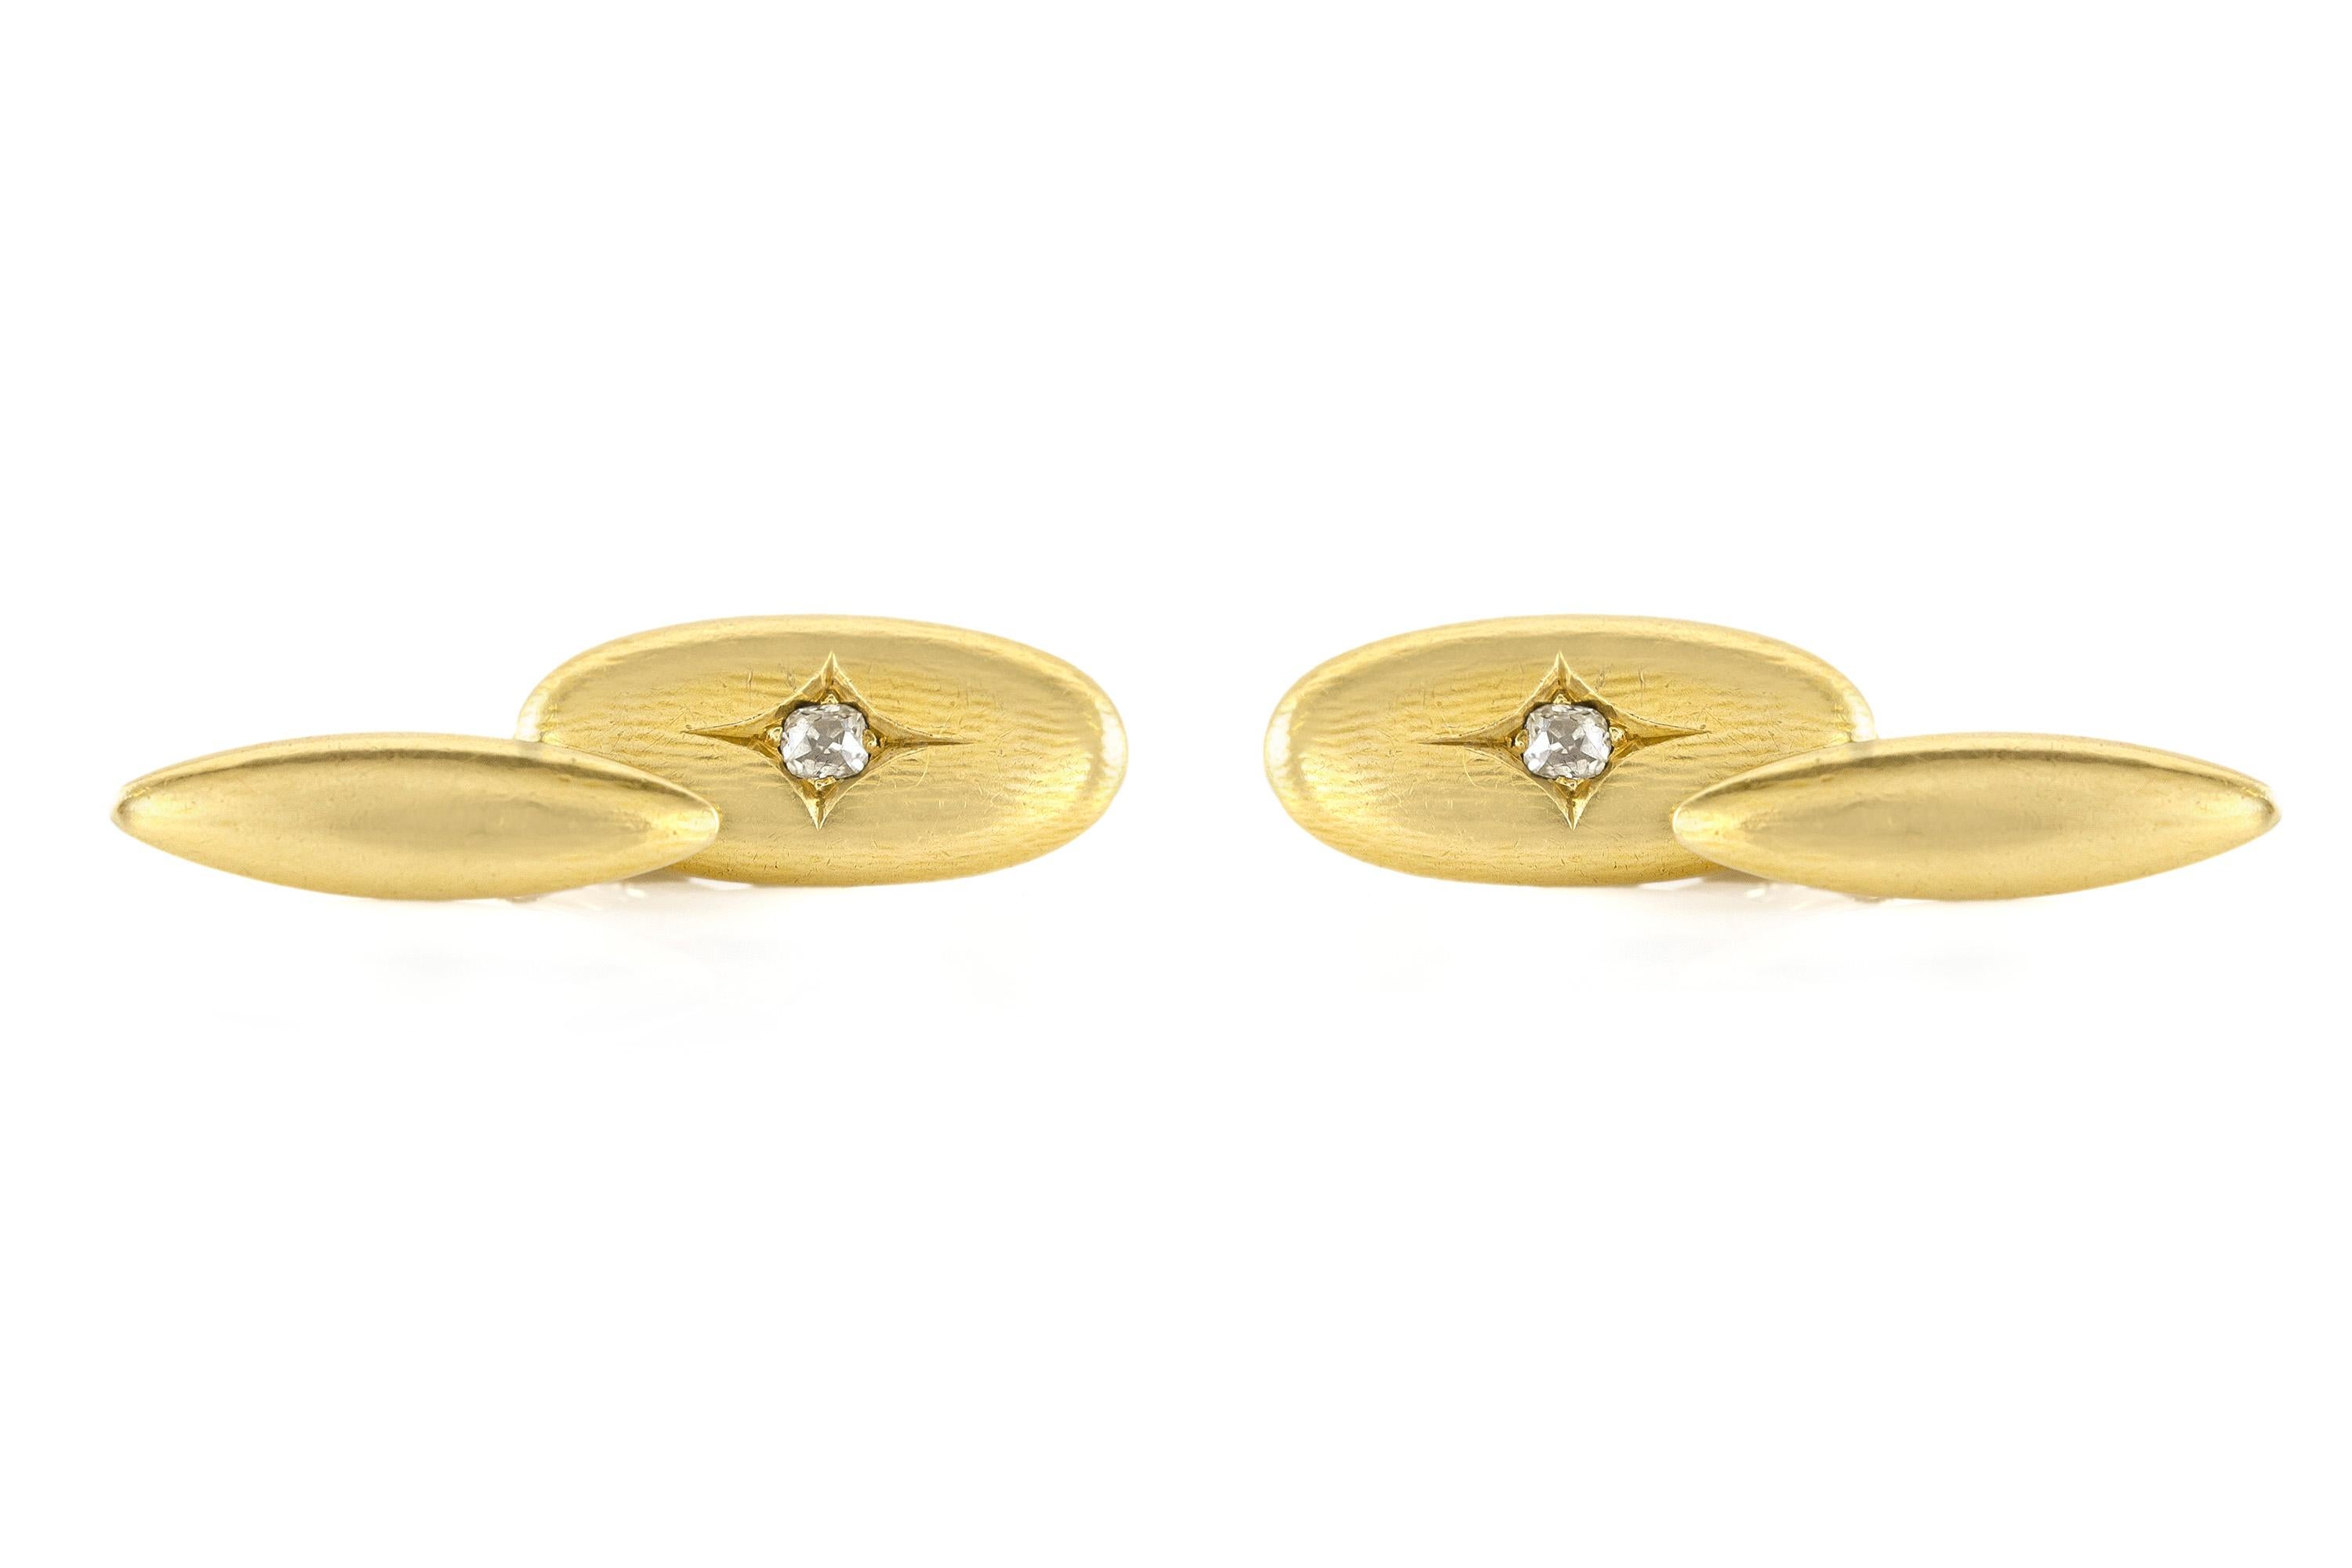 Cufflinks finely crafted in 18k yellow gold weighing a total of 3.00 dwt., with a tiny diamond of weight of 0.30k, size of each cufflink is 0.5 inch. Circa 1980.